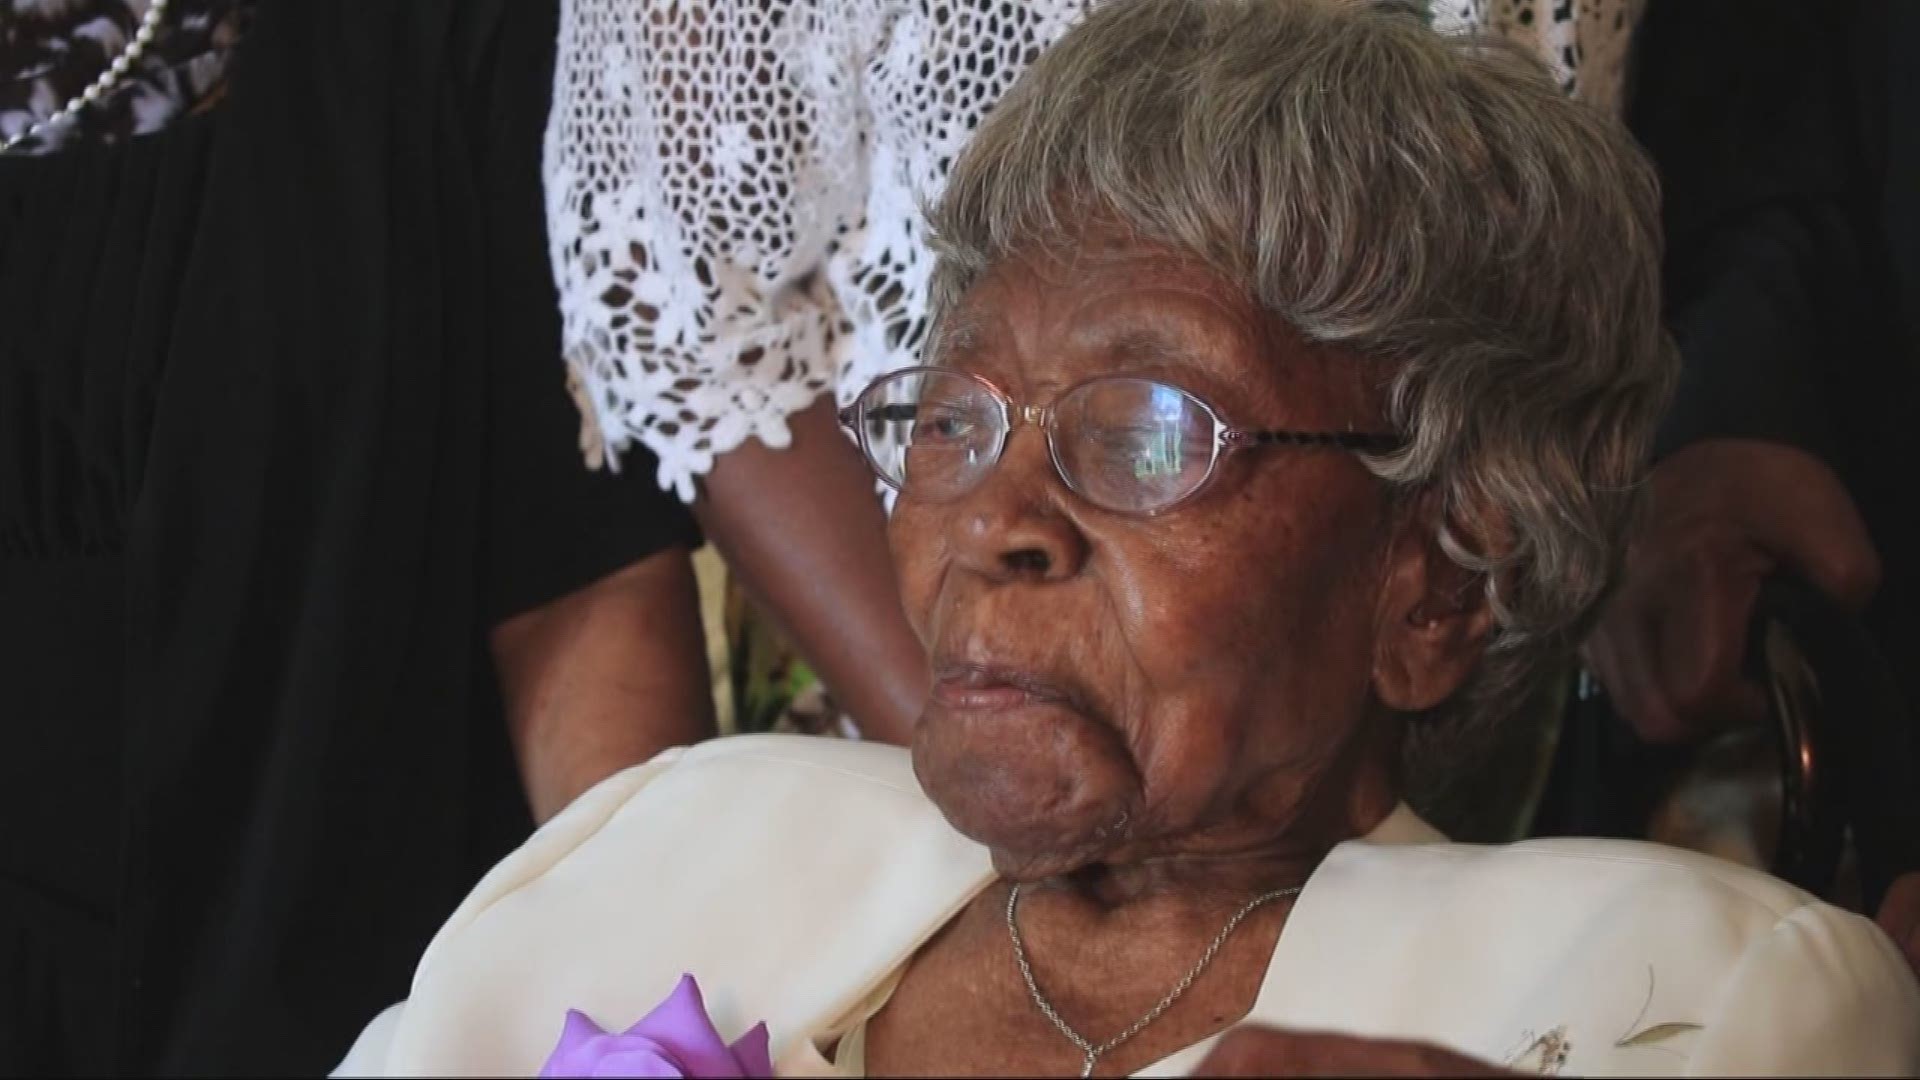 With family by her side, Hester Ford quietly celebrated her 112th birthday at her home just north of uptown. The big celebration happens this weekend.